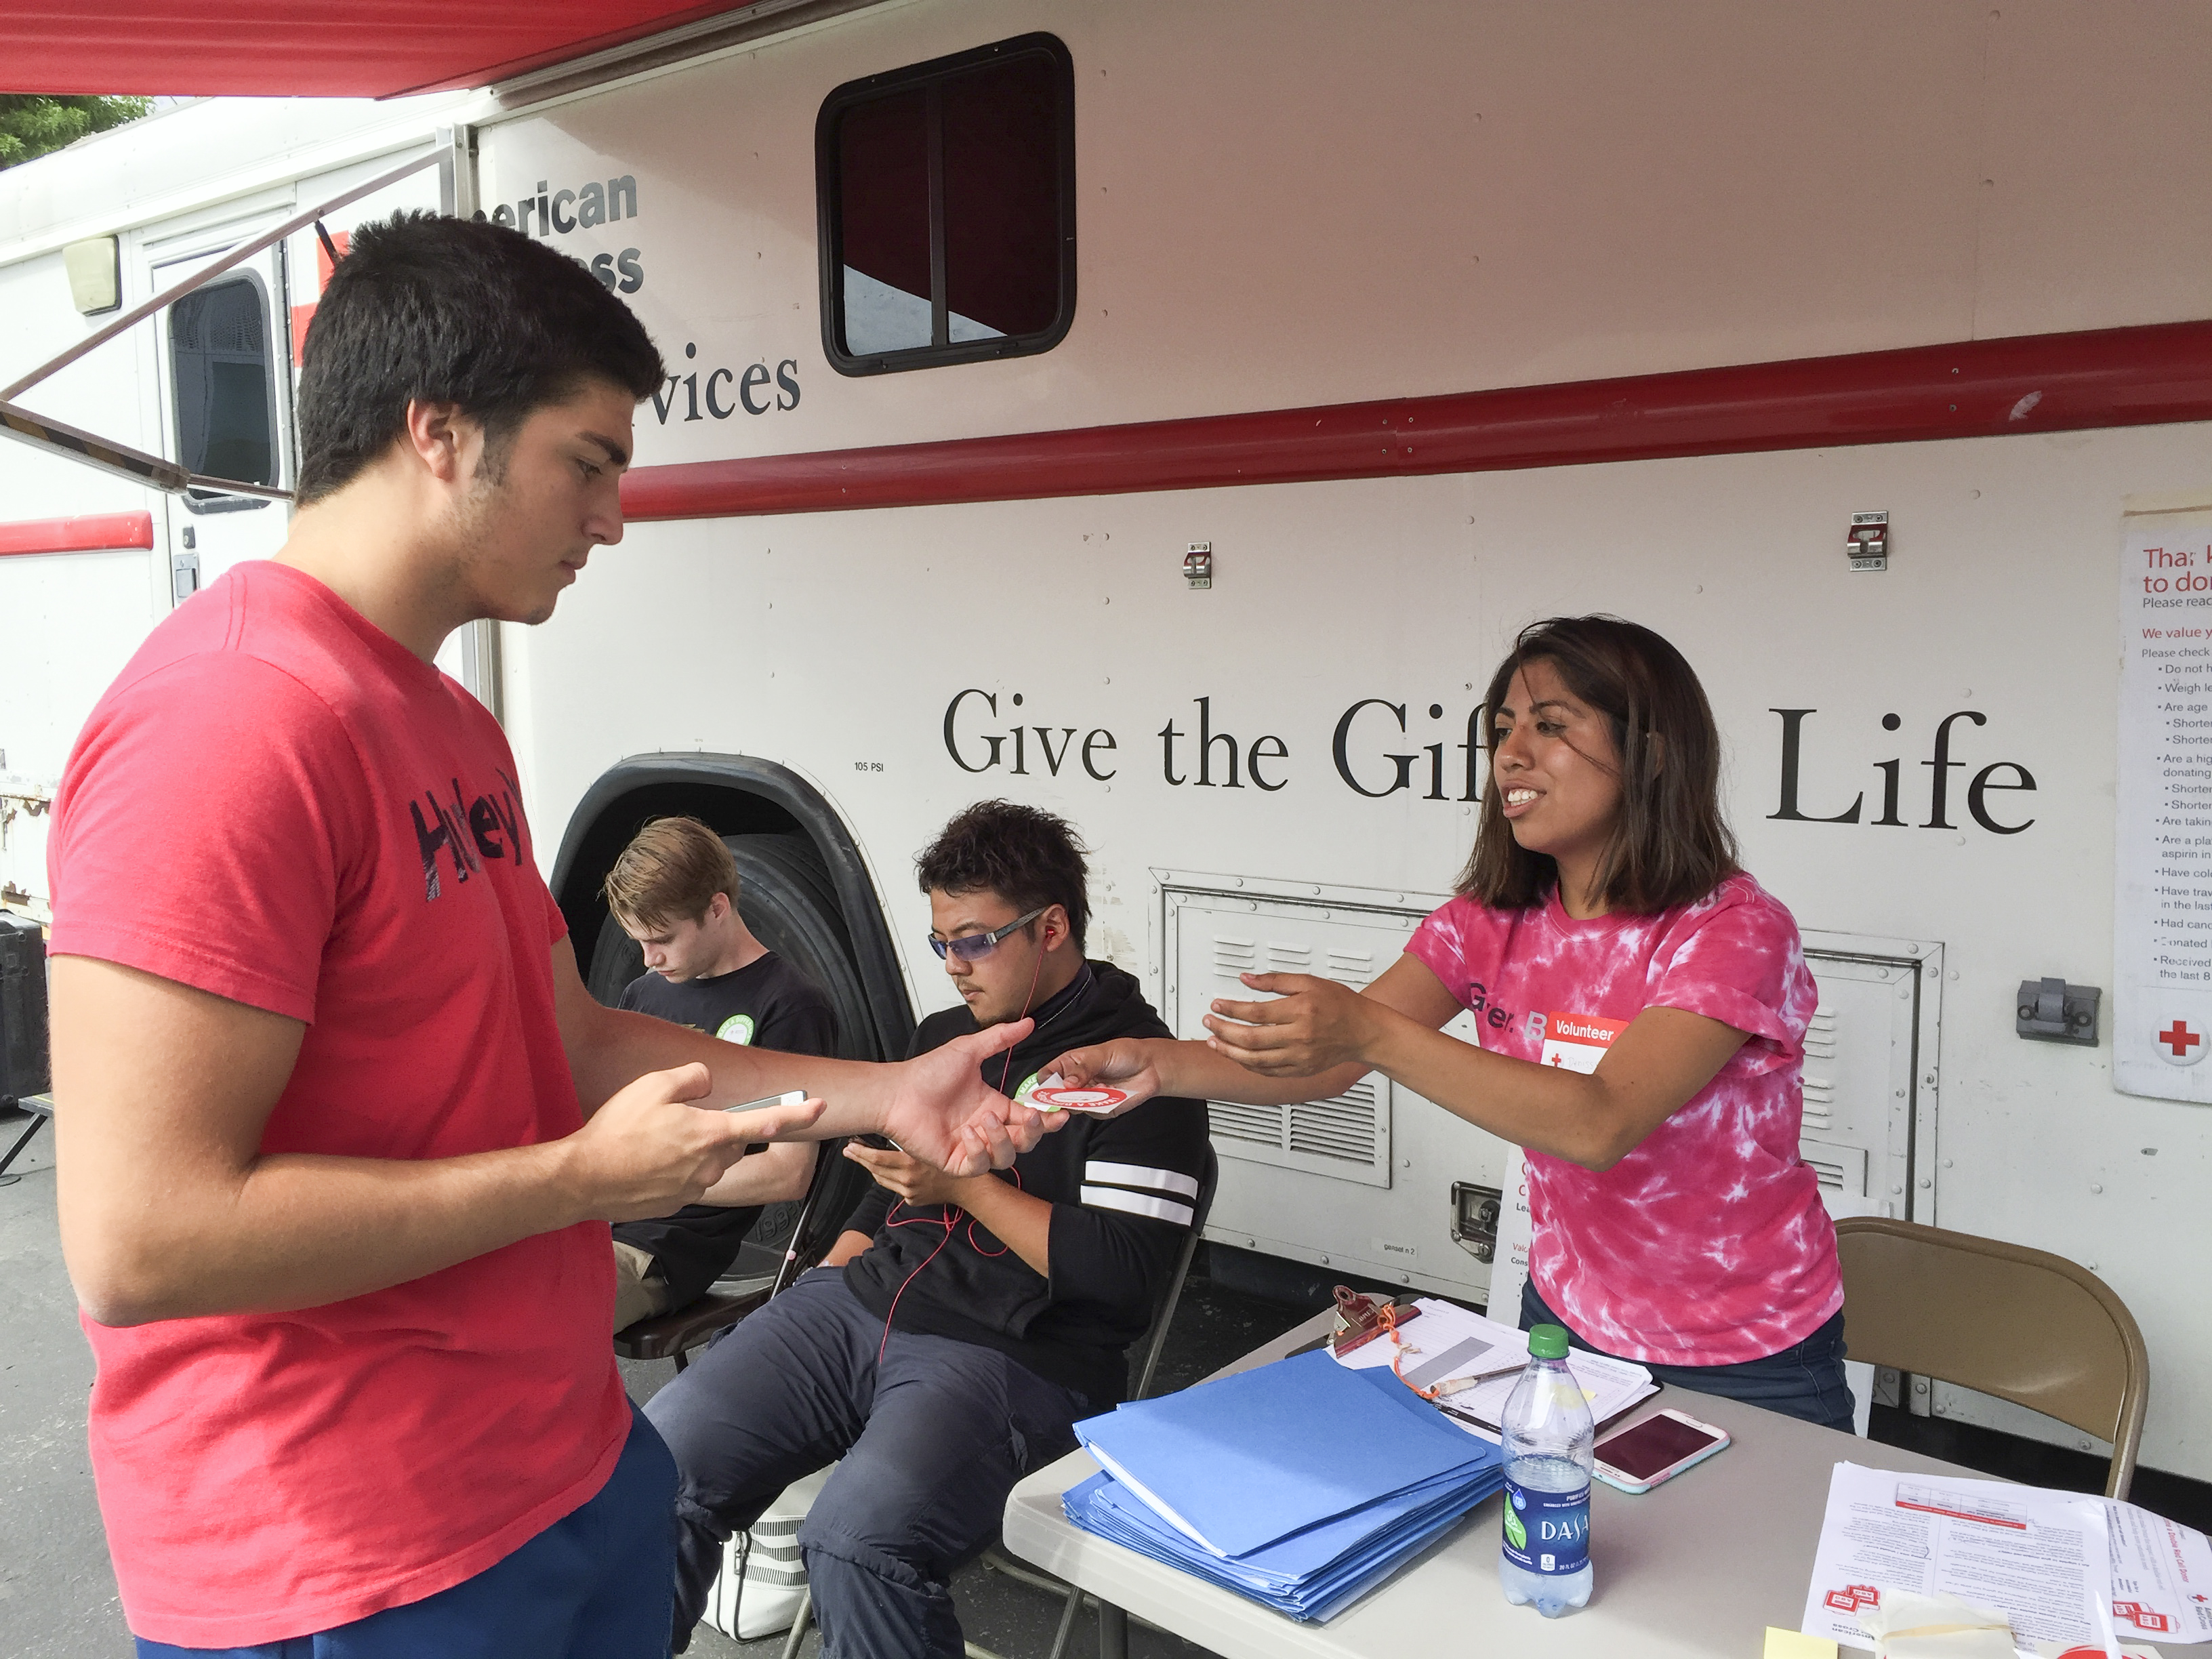 Red Cross volunteer Denisse Sanchez prepares Landon Raster for donating blood during the Palomar College Blood Drive on Tuesday Sept. 22, 2015 in Parking Lot 6. The Blood Drive is through Sept 25 and is sponsored by the Health Services Center. Each donation saves three lives. (Yvette Monteleone/The Telescope)